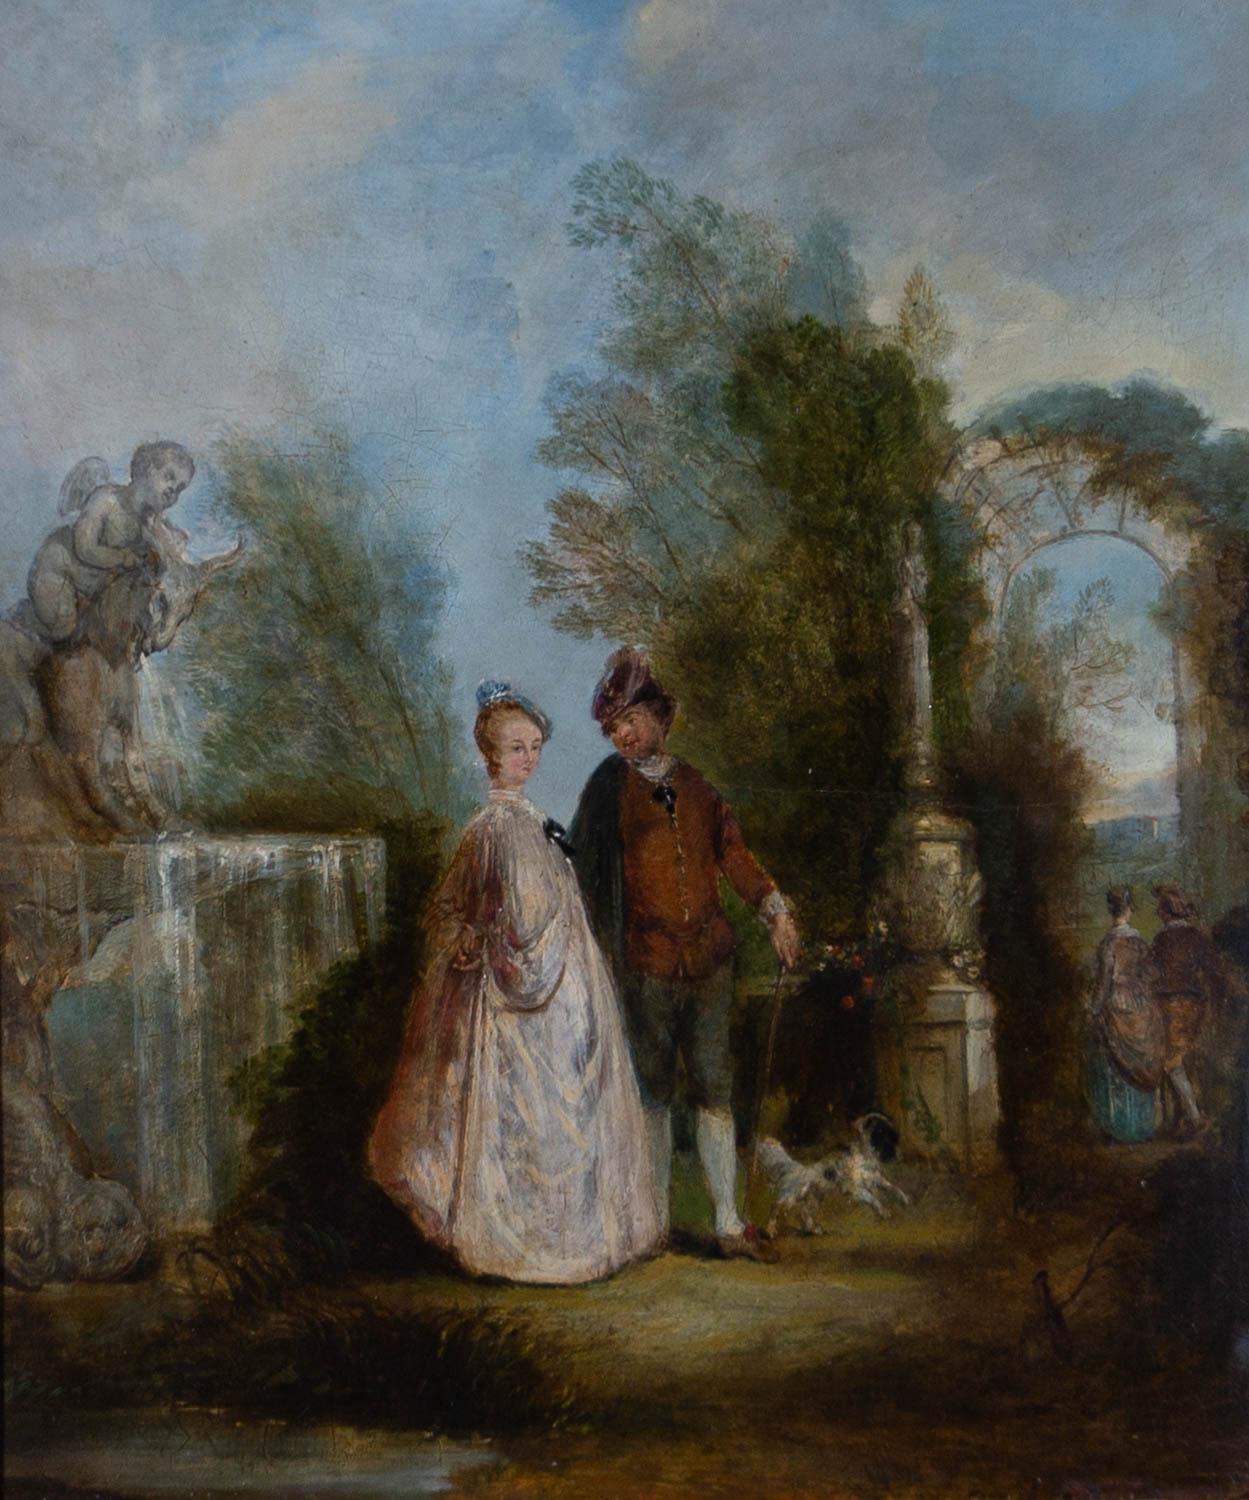 Sulis Fine Art is proud to present this fine Georgian oil, attributed to the genre scene painter Henry Adams (1794-1868). The scene shows an elegantly dressed couple, the woman in a flowing white dress and the man in britches and a rust coloured ,